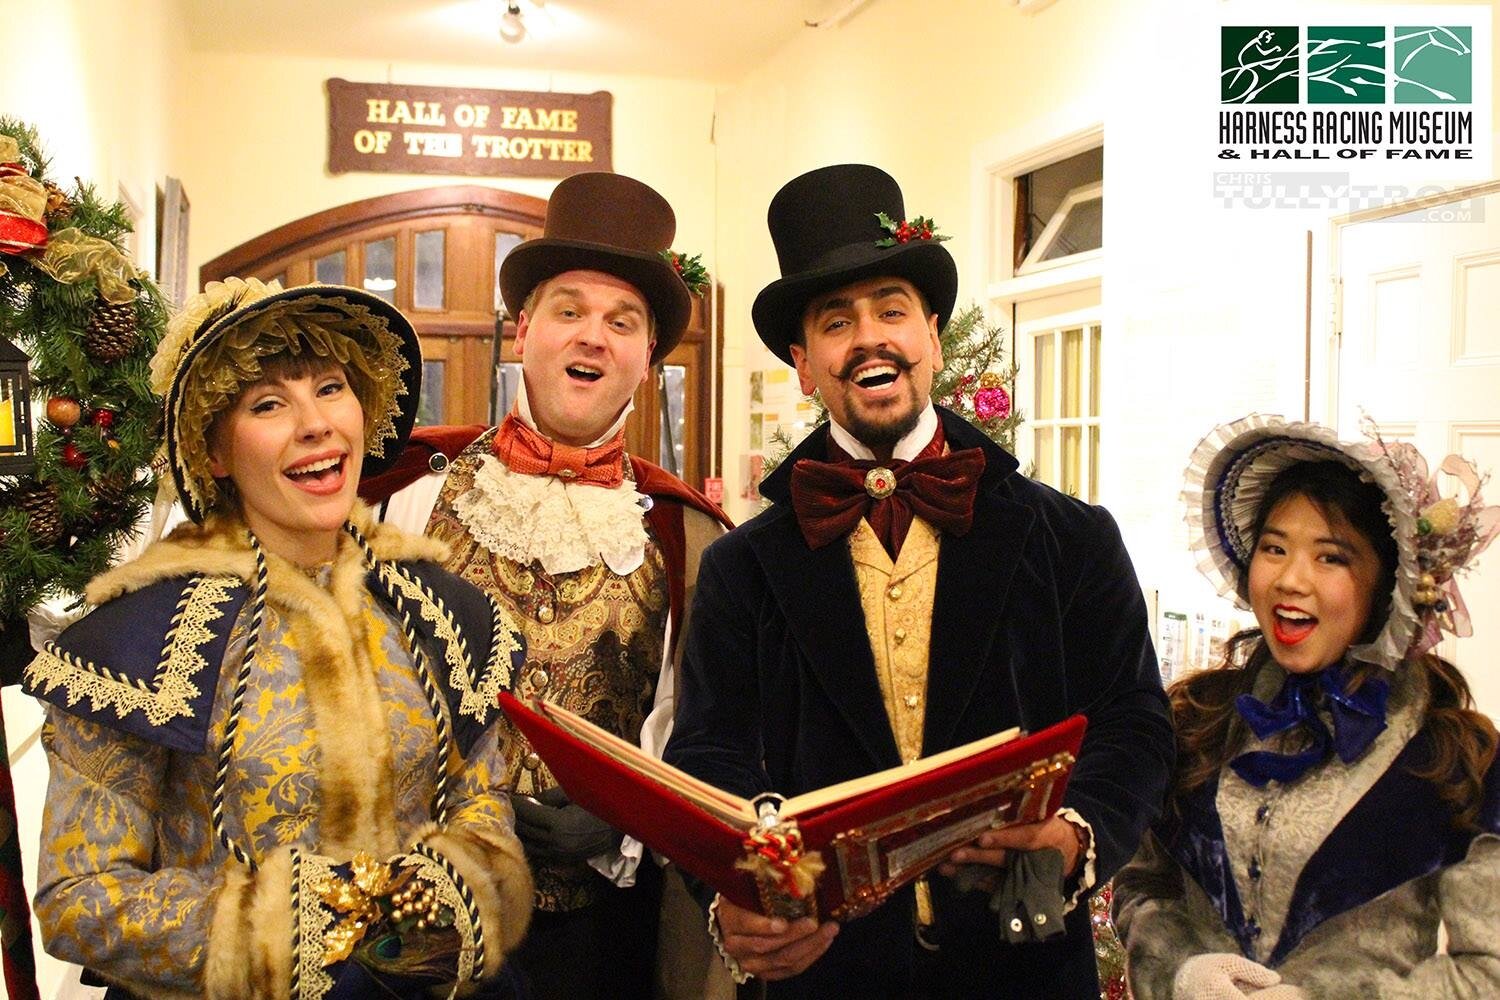 The Yuletide Carolers will entertain at the Harness Racing Hall of Fame and Museum in Goshen on December 7.